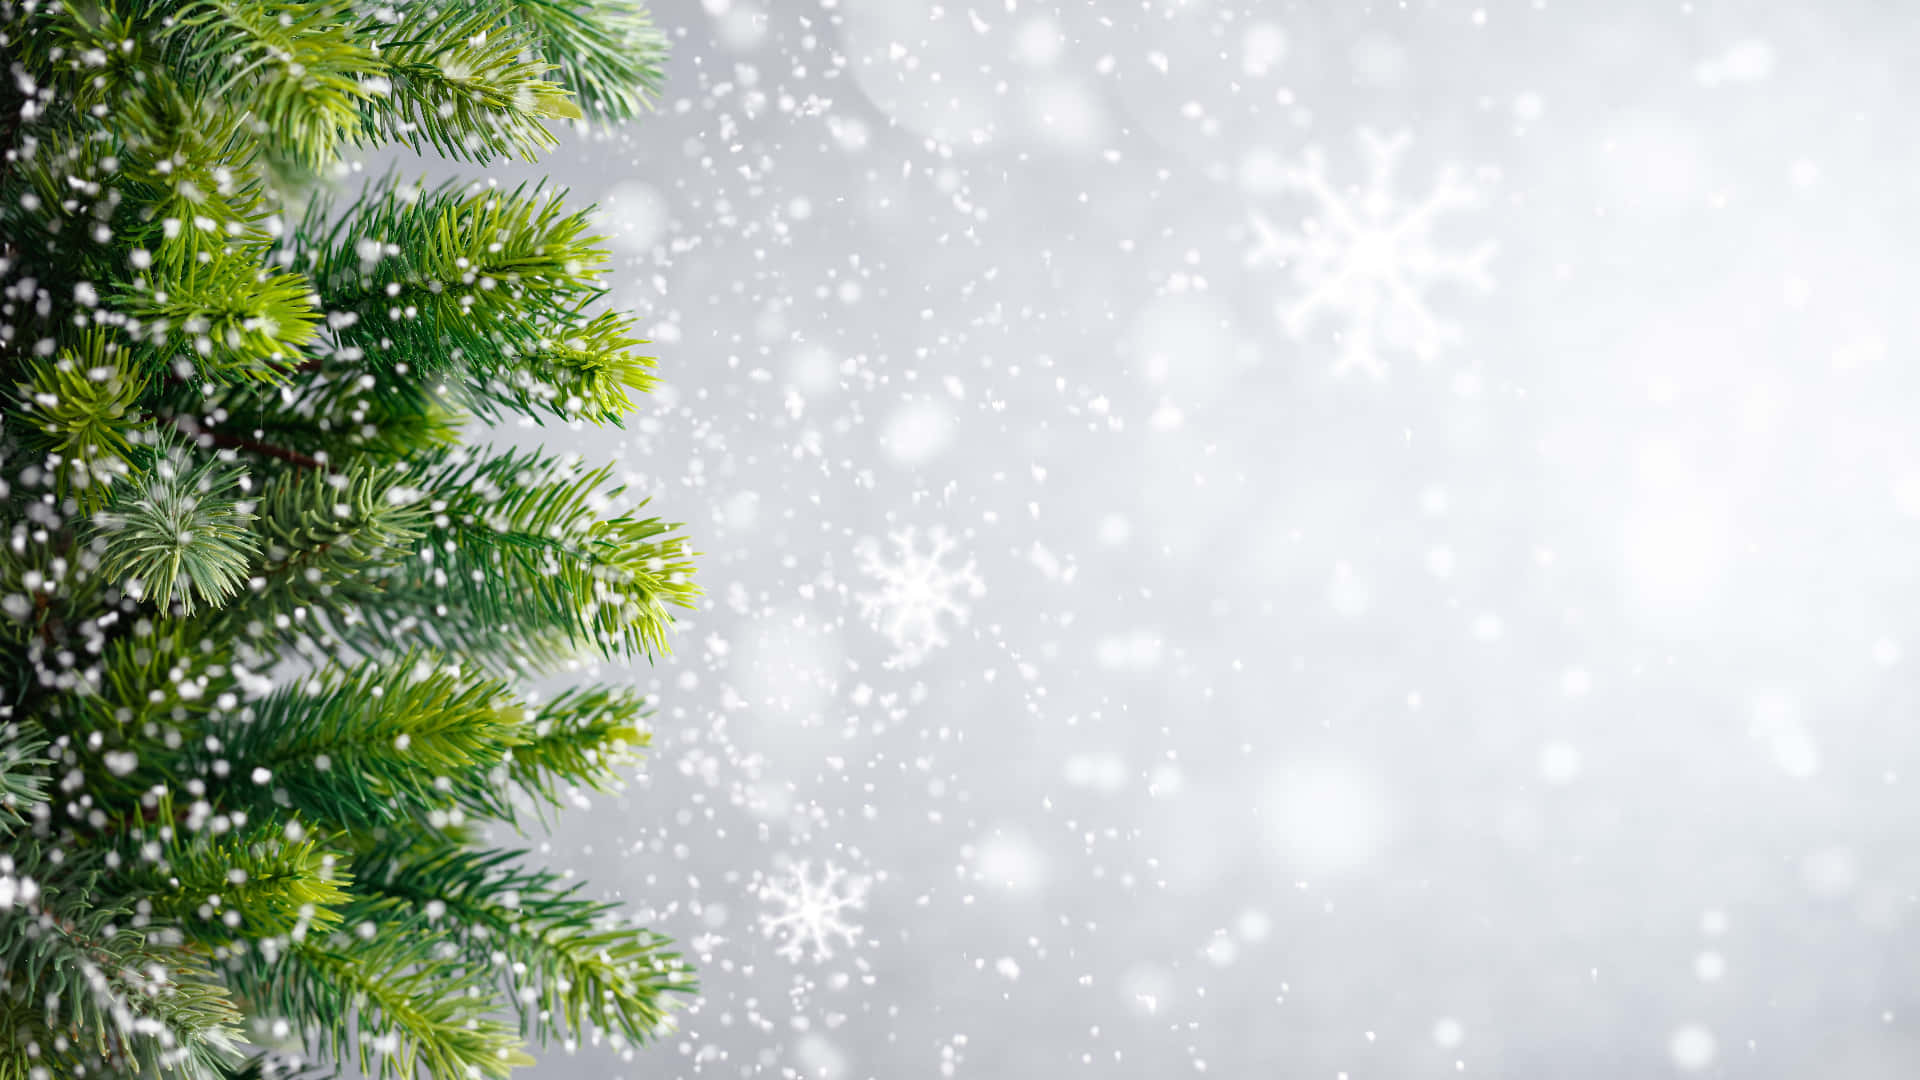 A Christmas Tree Branch With Snowflakes Falling On A Gray Background